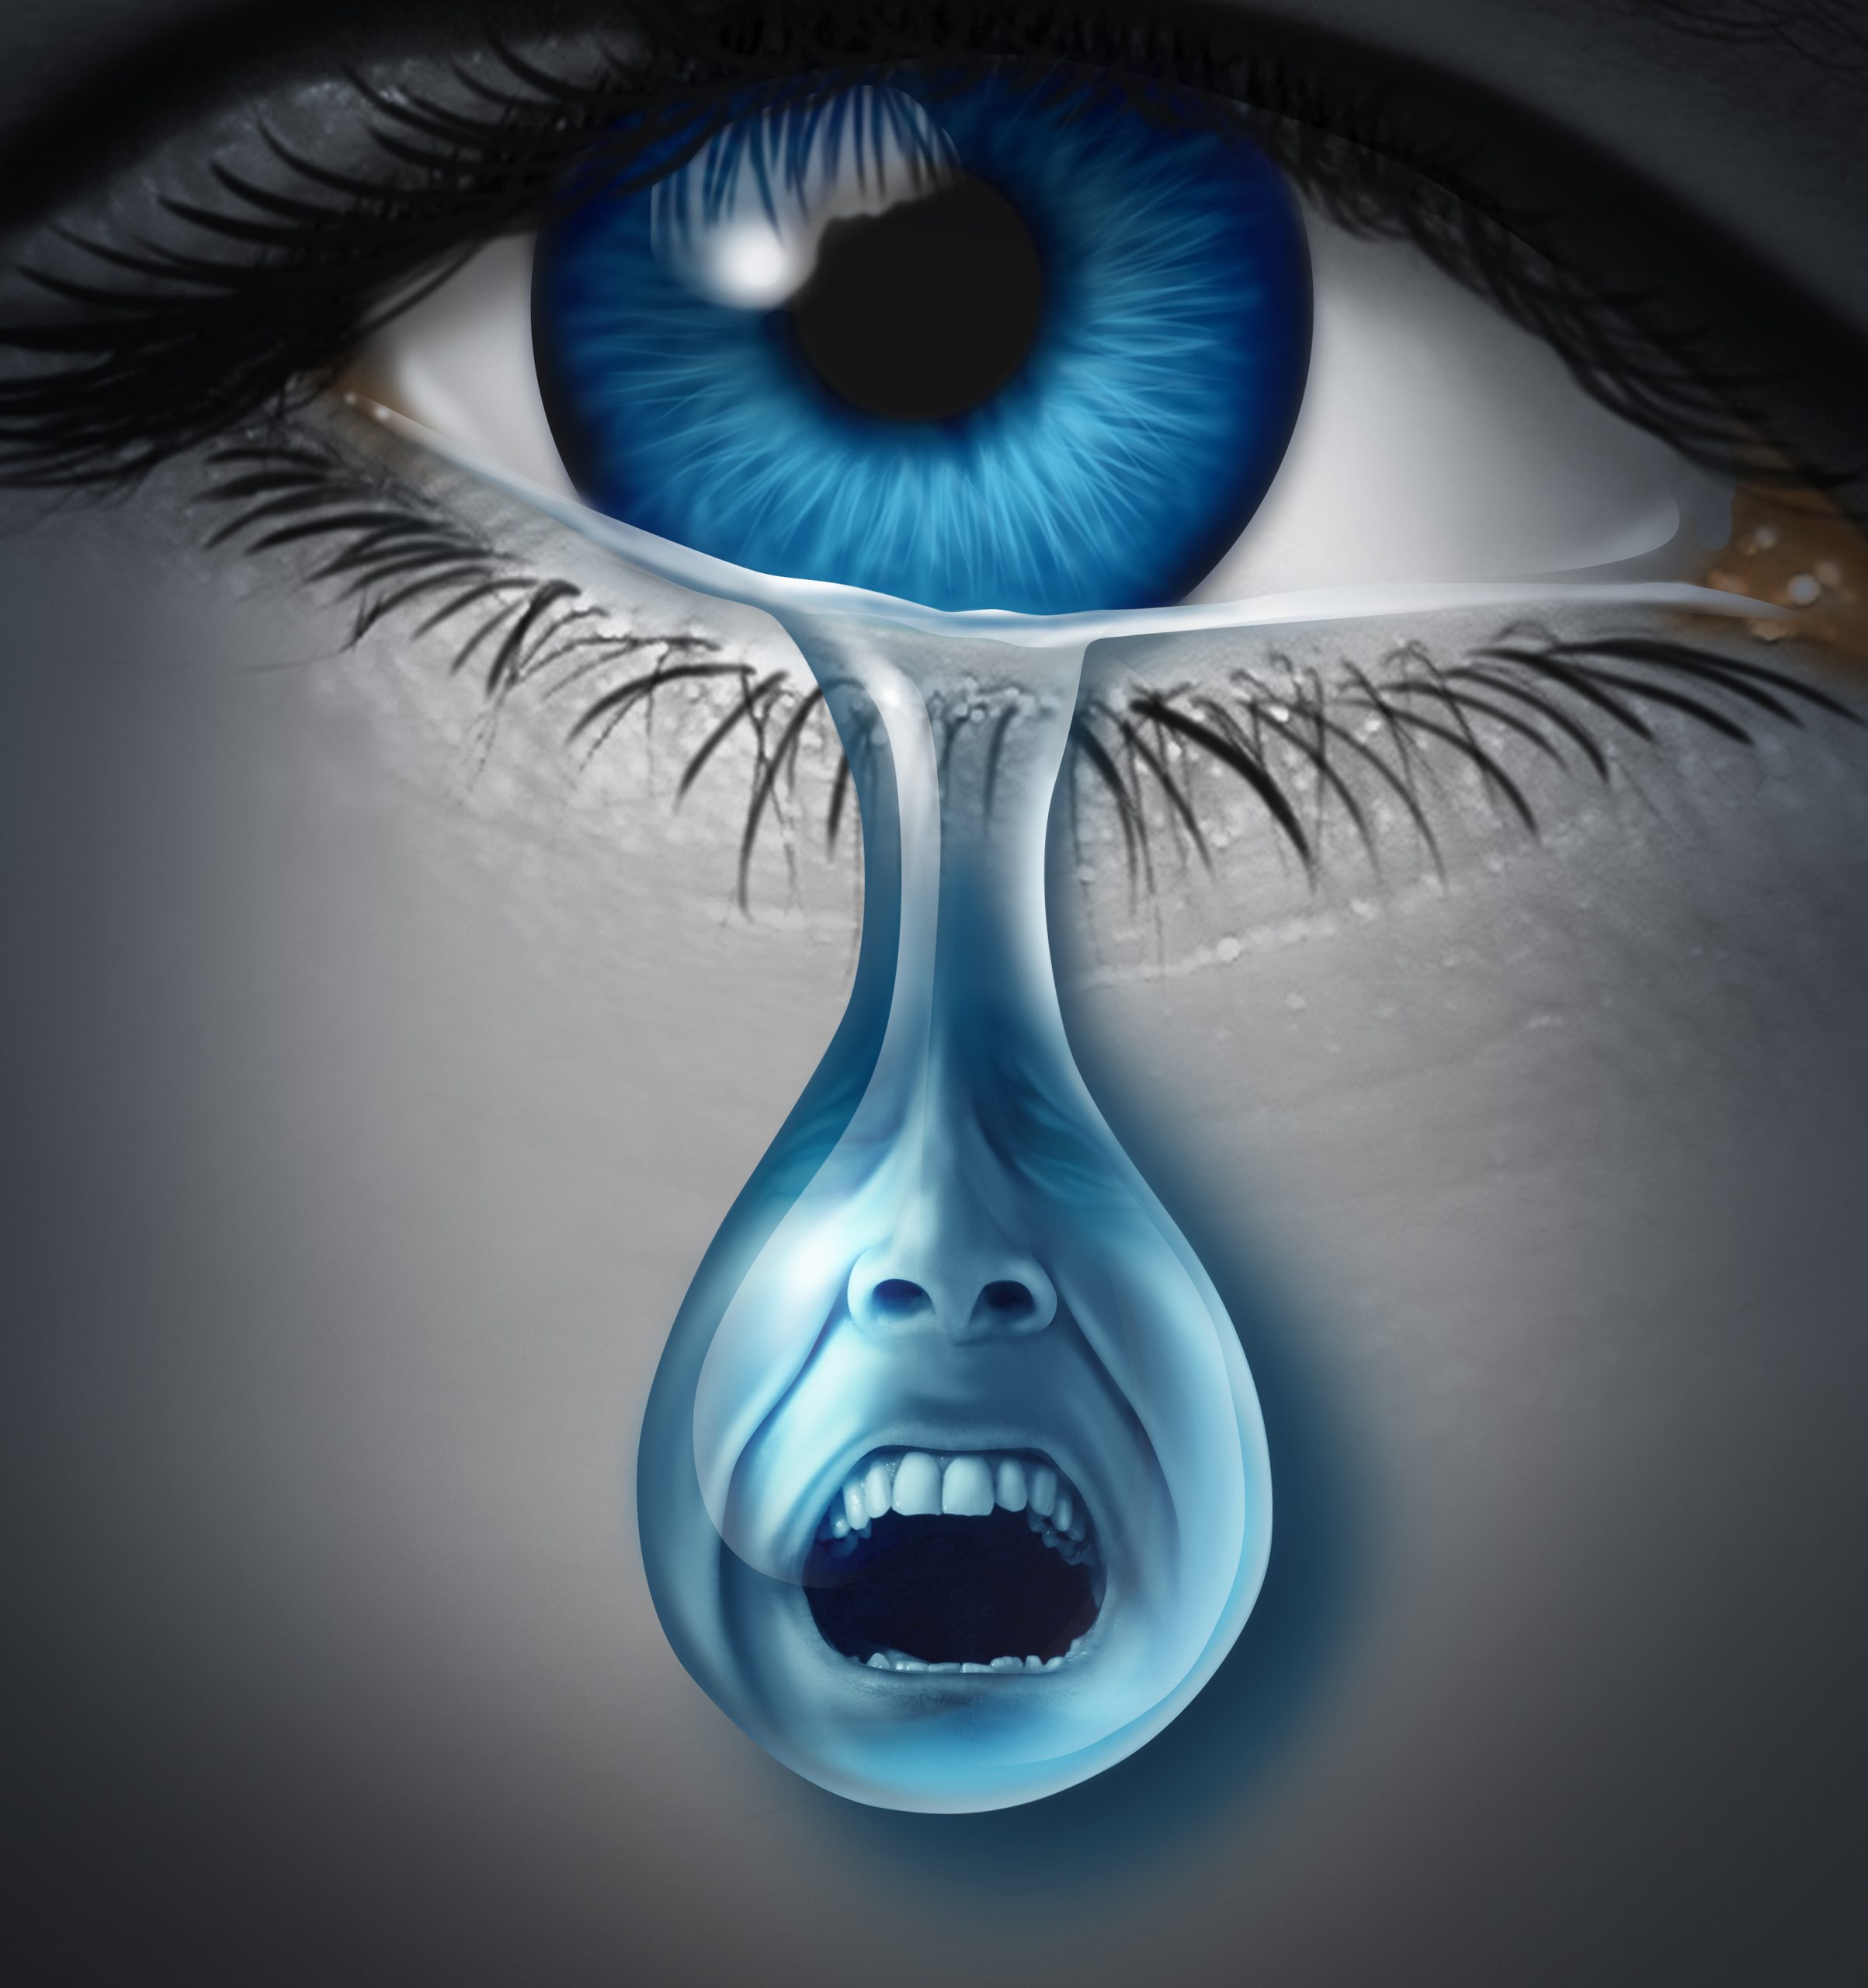 Distress and suffering with a human eye crying a single tear drop with a screaming facial expression of anguish and pain due to grief or emotional loss or business burnout